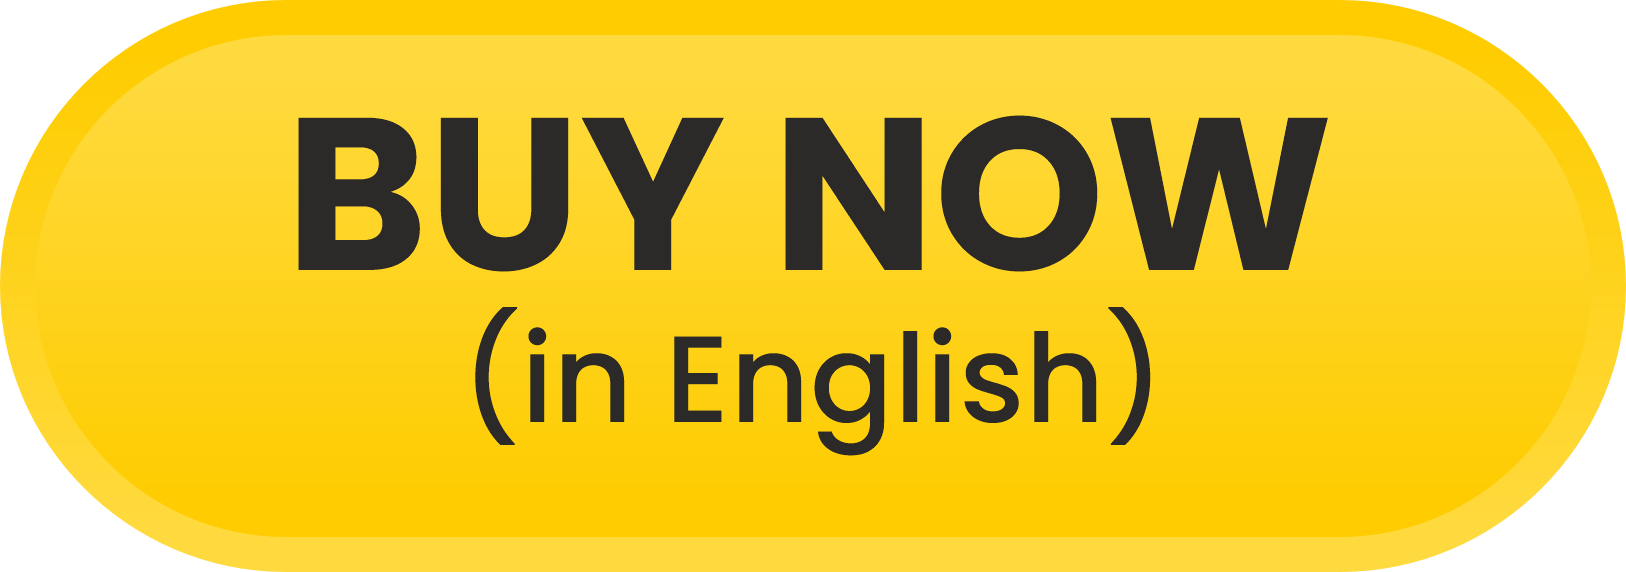 Buy Now in English